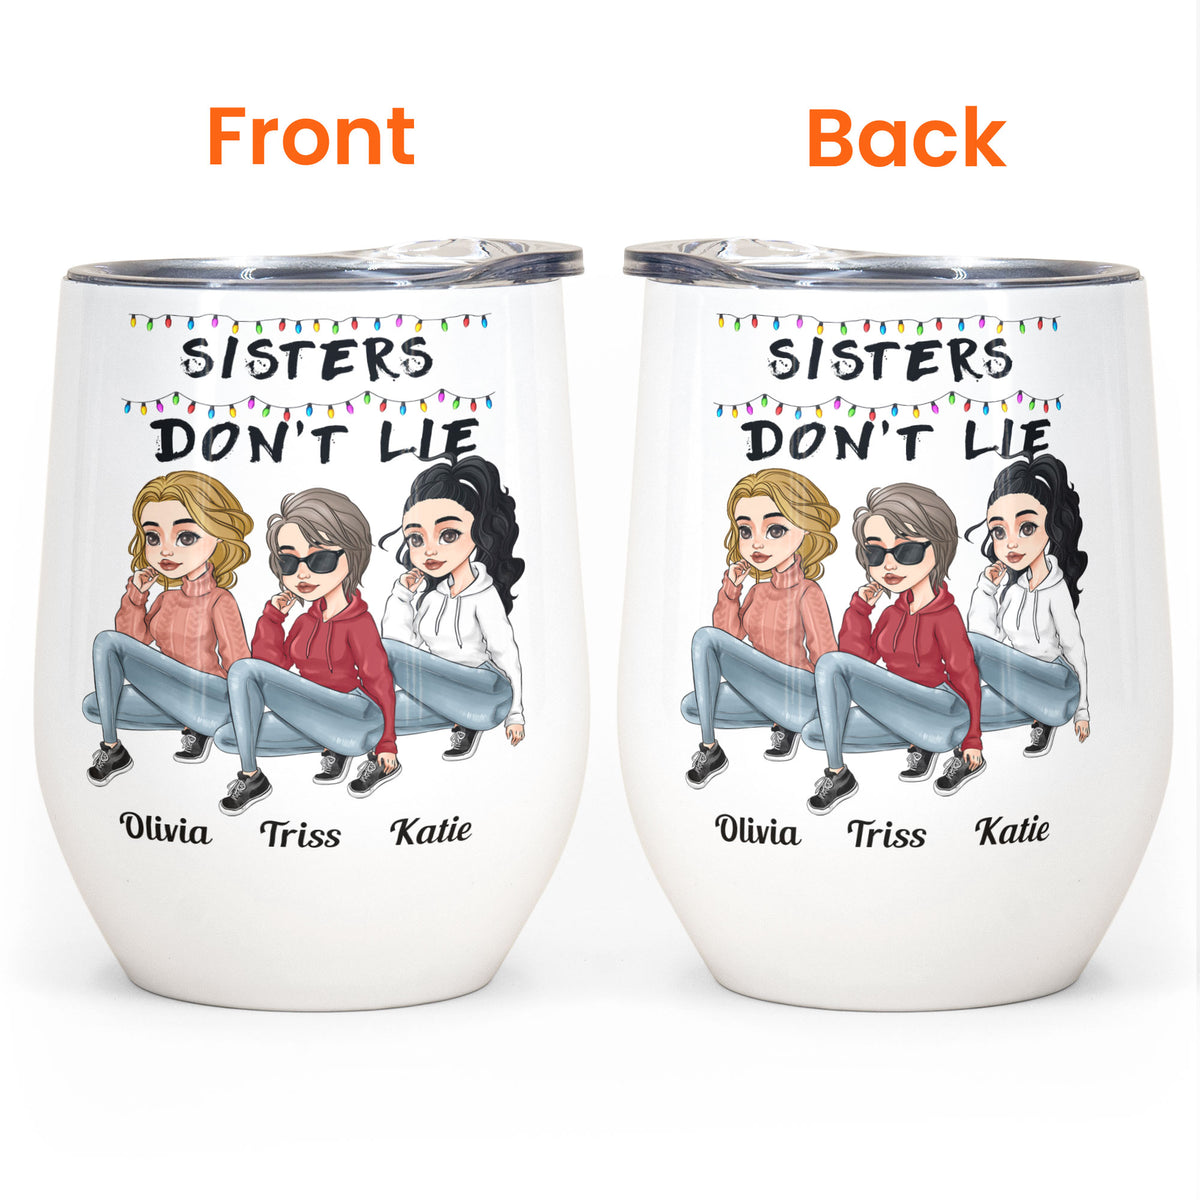 https://www.macorners.shop/wp-content/uploads/1689/82/explore-our-friends-dont-lie-personalized-wine-tumbler-birthday-gift-for-besties-bff-sisters-sistas-friends-macorner-collection-buy-now_2.jpg